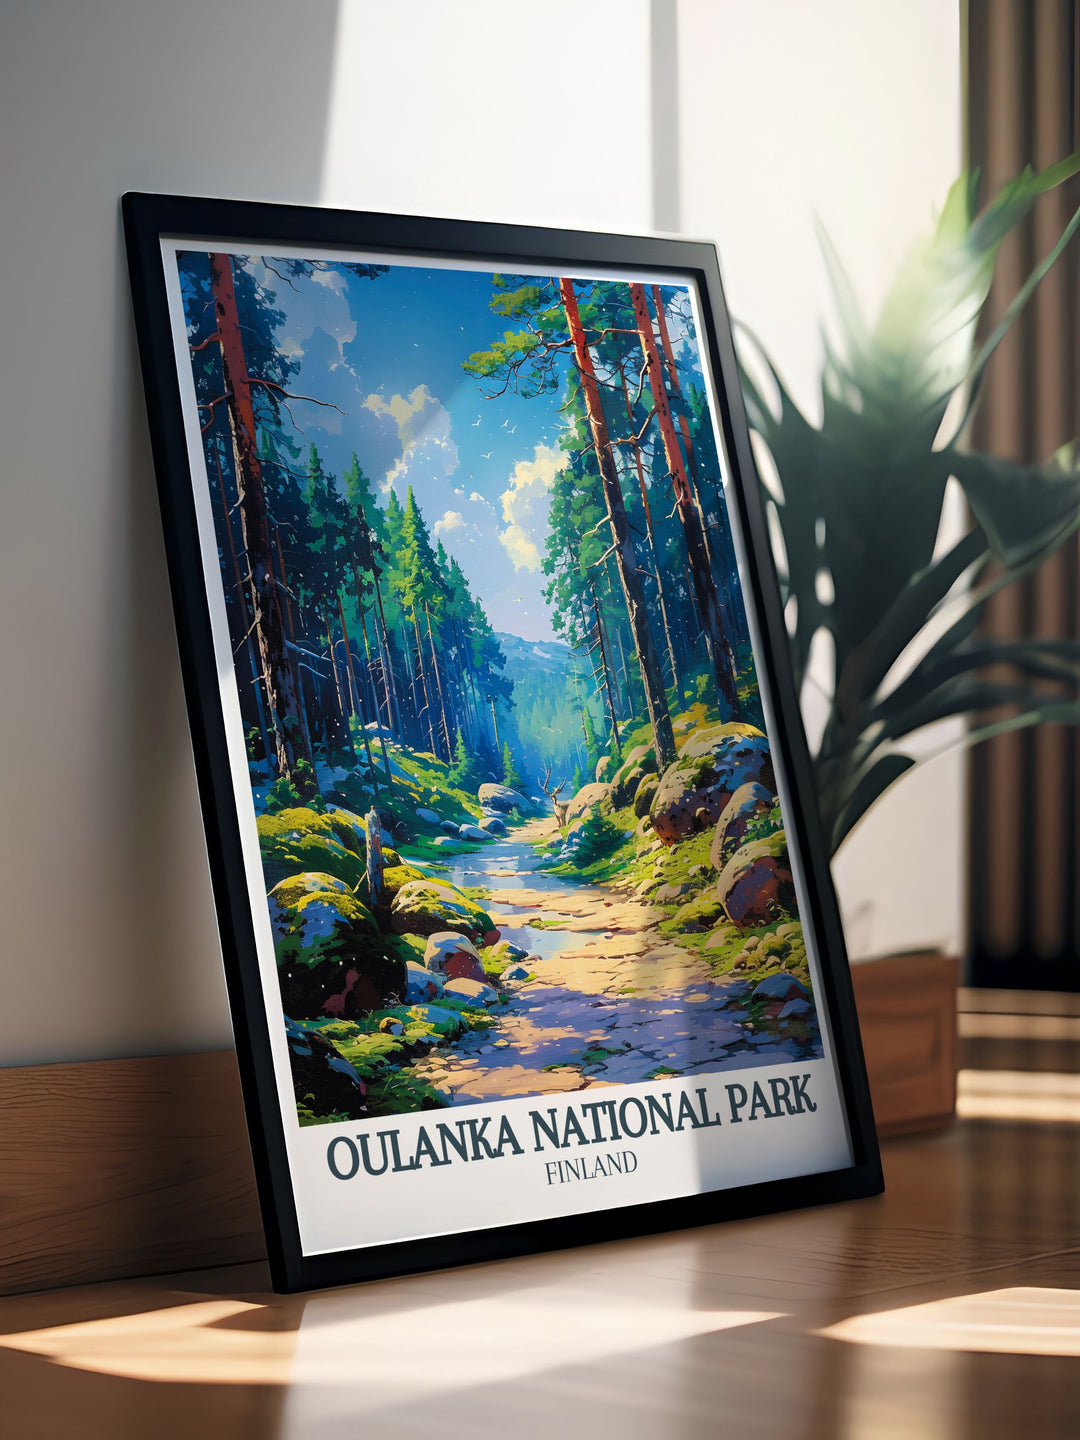 Beautifully detailed national park poster featuring the Oulanka river Kiutakongas Rapids. This framed print is perfect for nature lovers and those who appreciate Scandinavian art. A great addition to your home decor or as a thoughtful gift